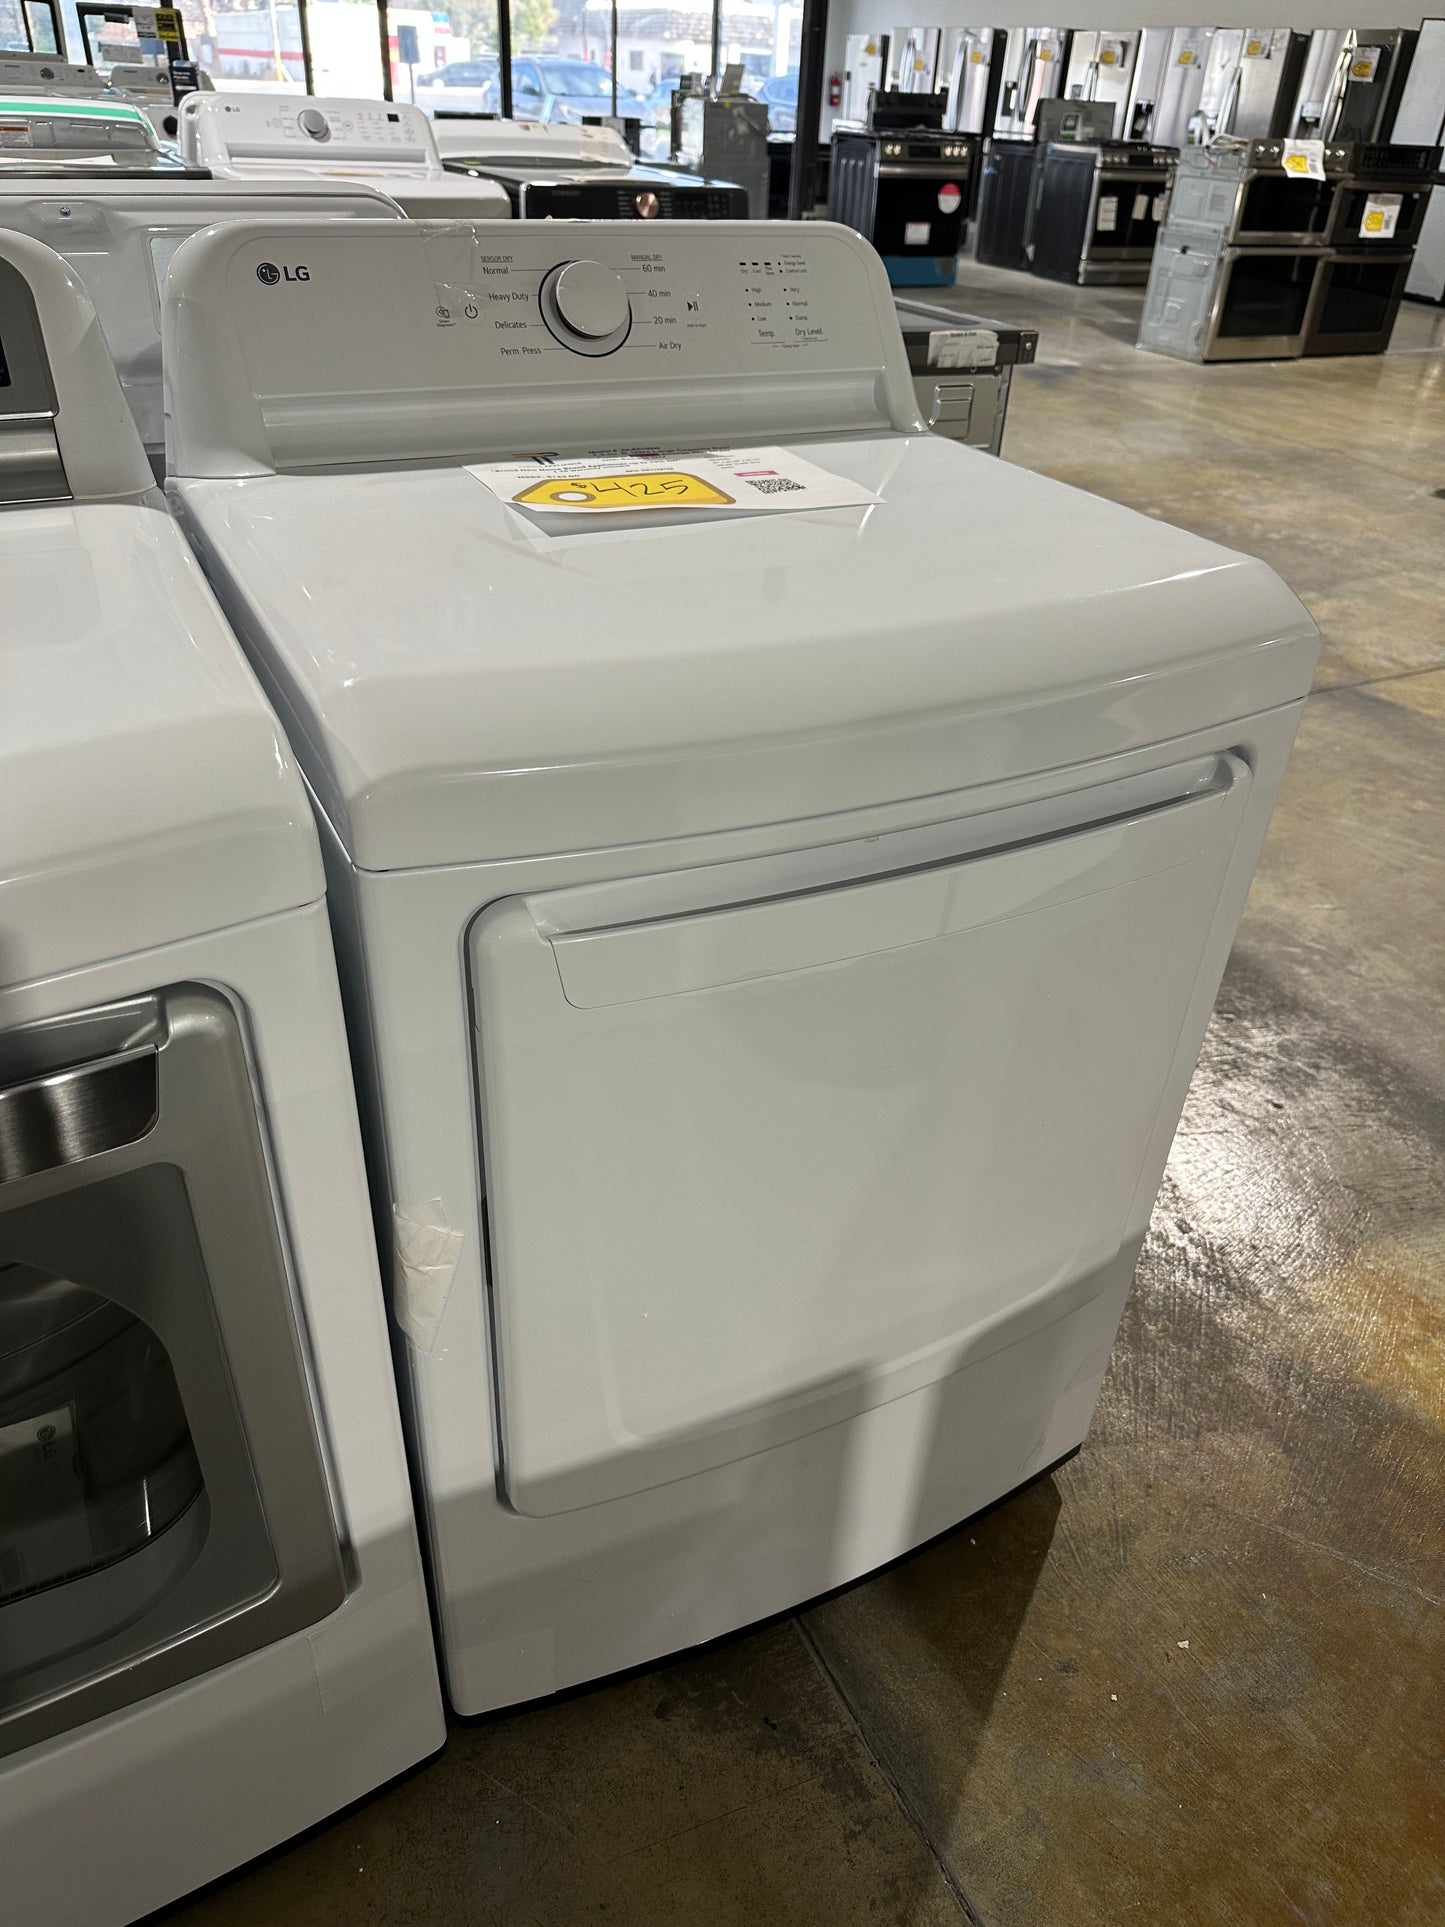 LG - 7.3 Cu. Ft. Smart Electric Dryer with Sensor Dry - White  MODEL: DLE6100W  DRY11875S